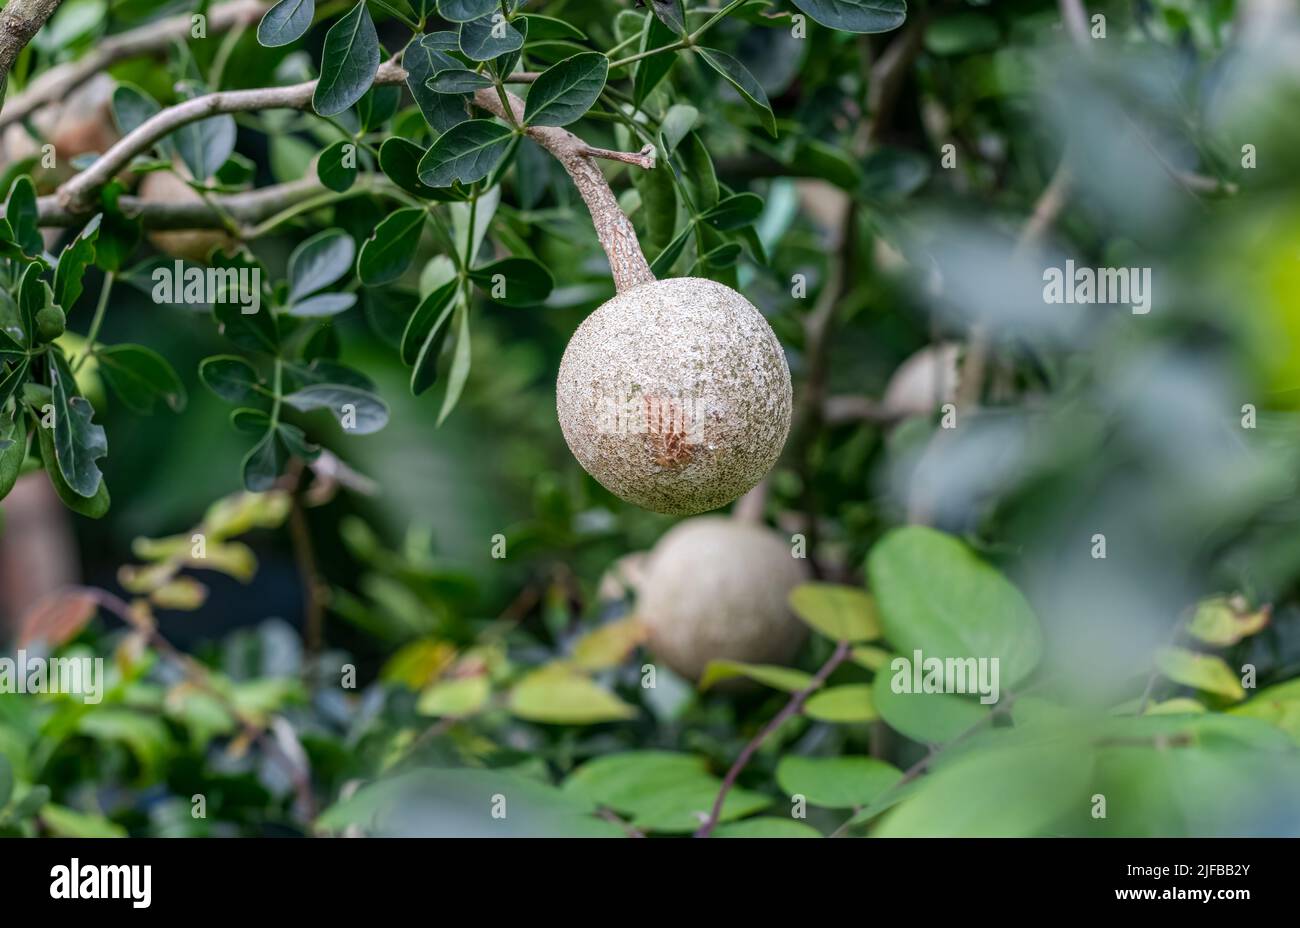 Wood apple or limonia acidissima fruit growing on the tree with copy space Stock Photo